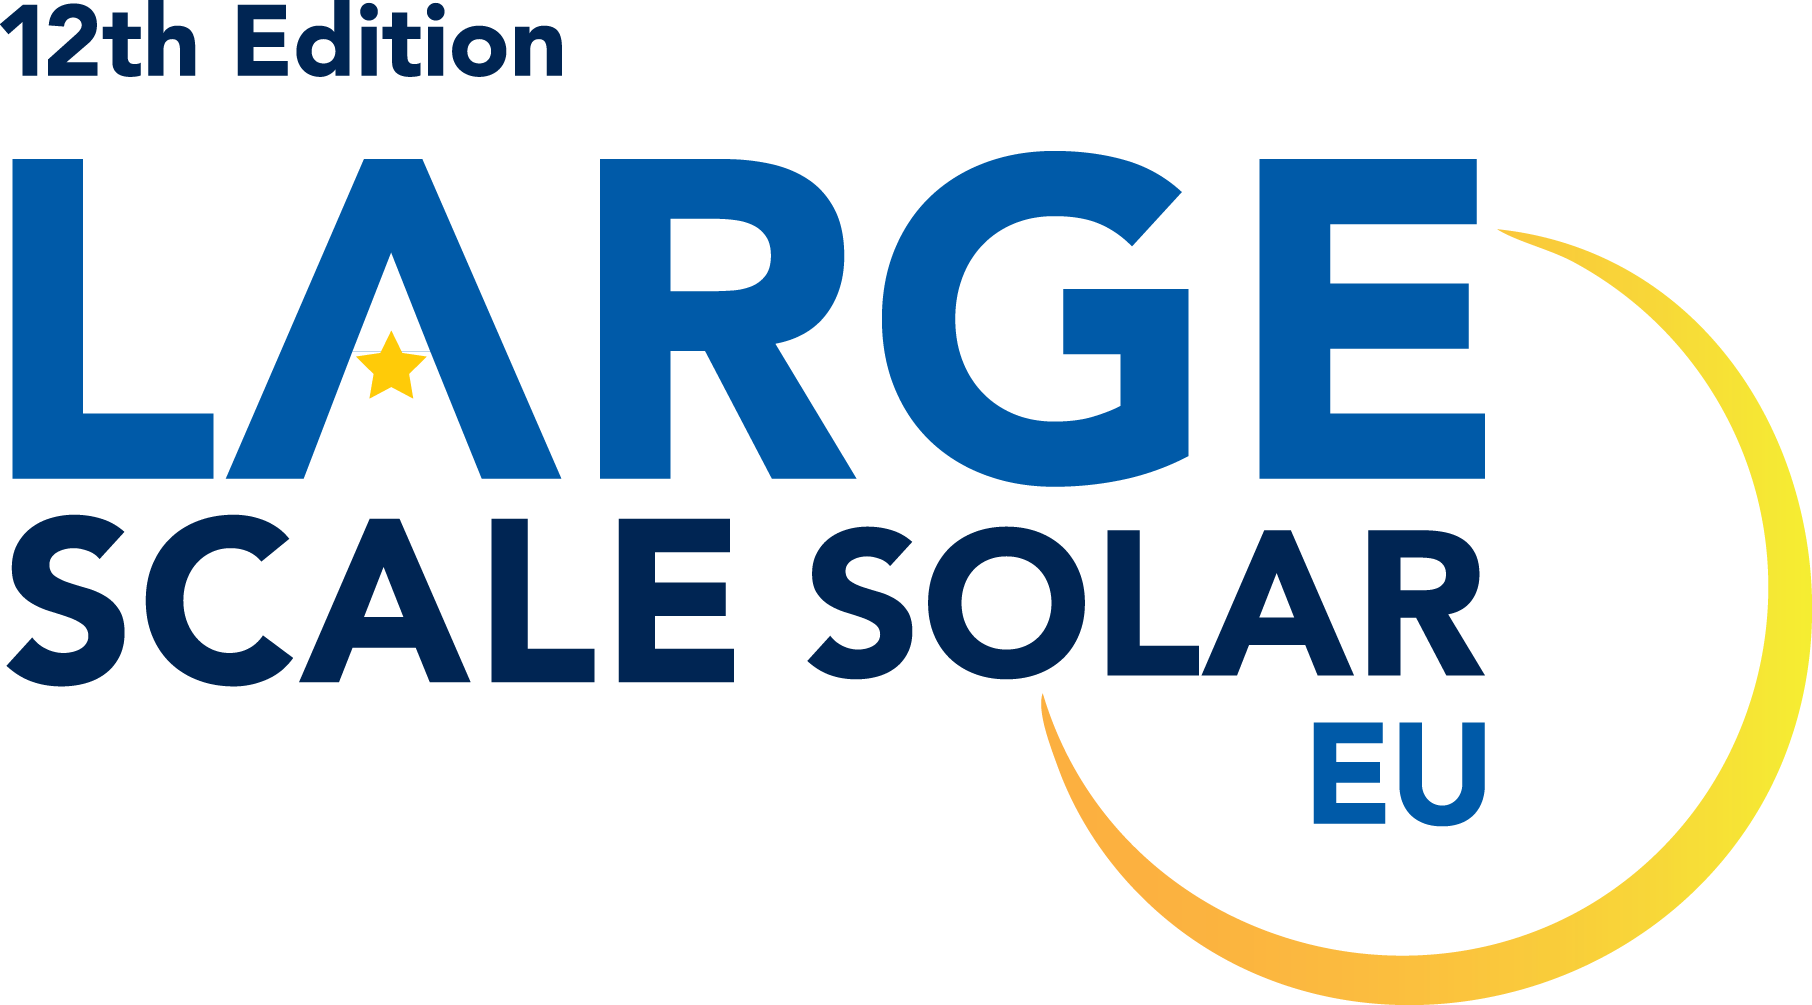 Large Scale Solar Europe 12th Edition Logo